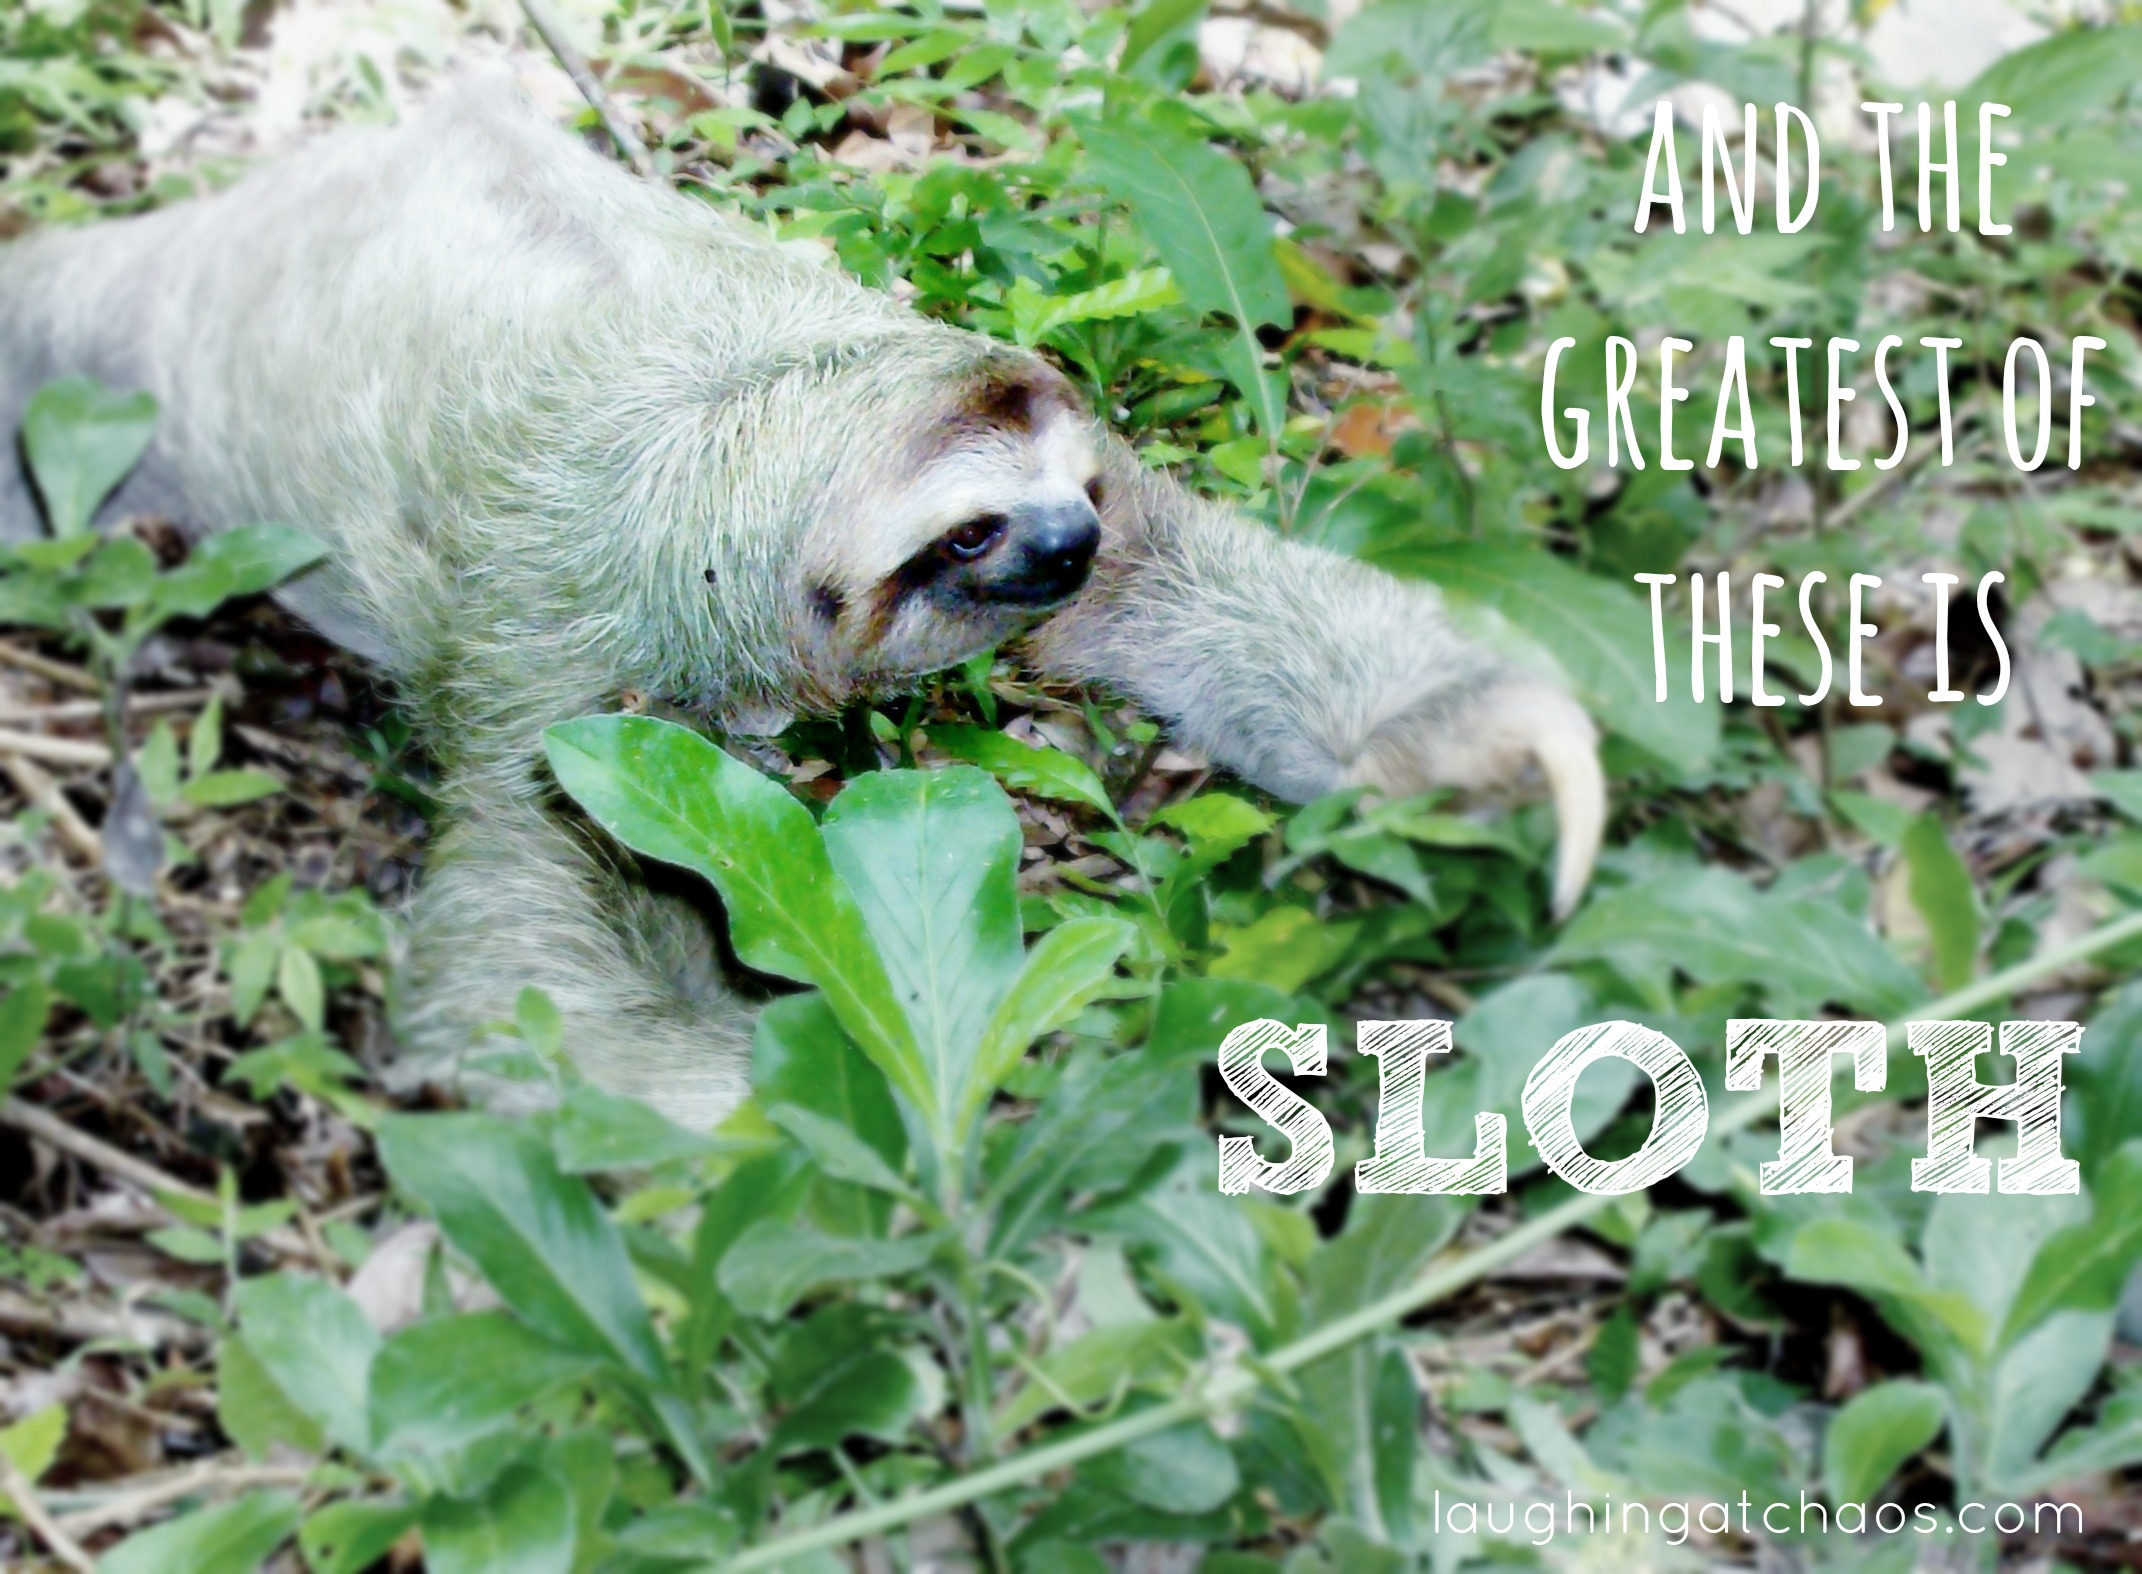 And the greatest of these is sloth